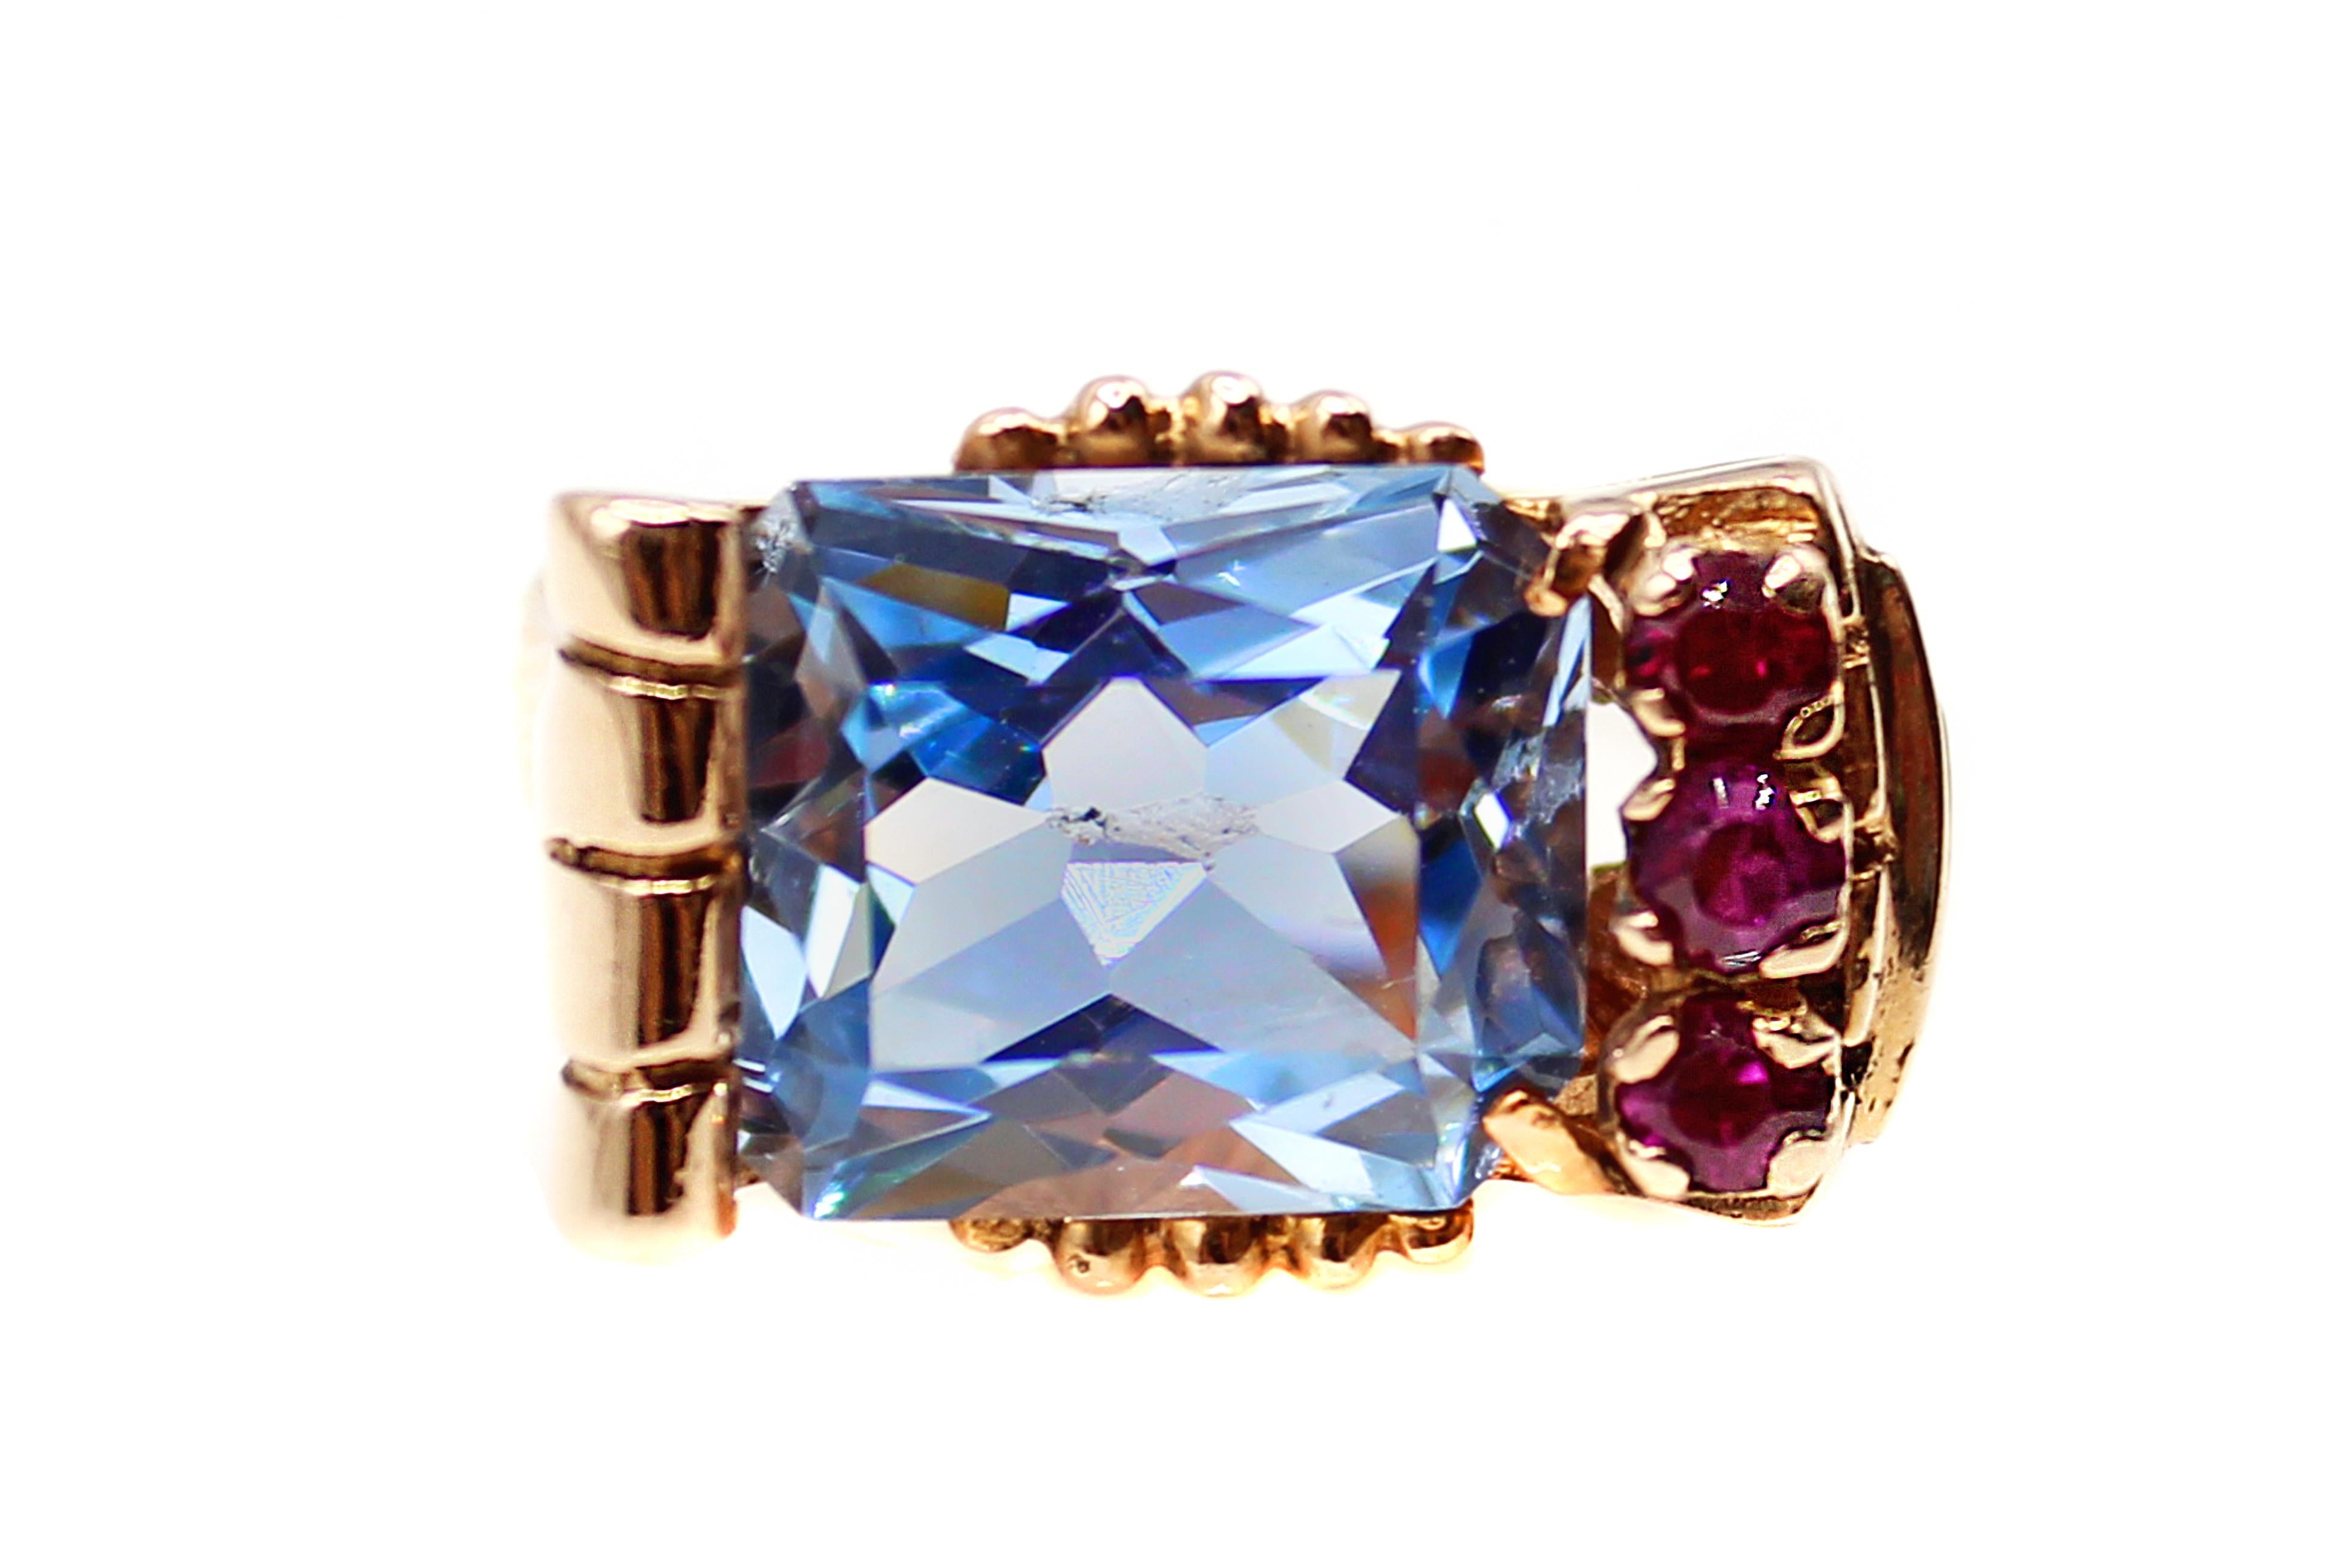 Uniquely designed as an asymmetrical interesting ring, this creation from ca 1940 is masterfully hand-crafted in rose gold. This charming Retro ring features a centrally horizontally set carre cut Aquamarine and is embellished by 3 bright red